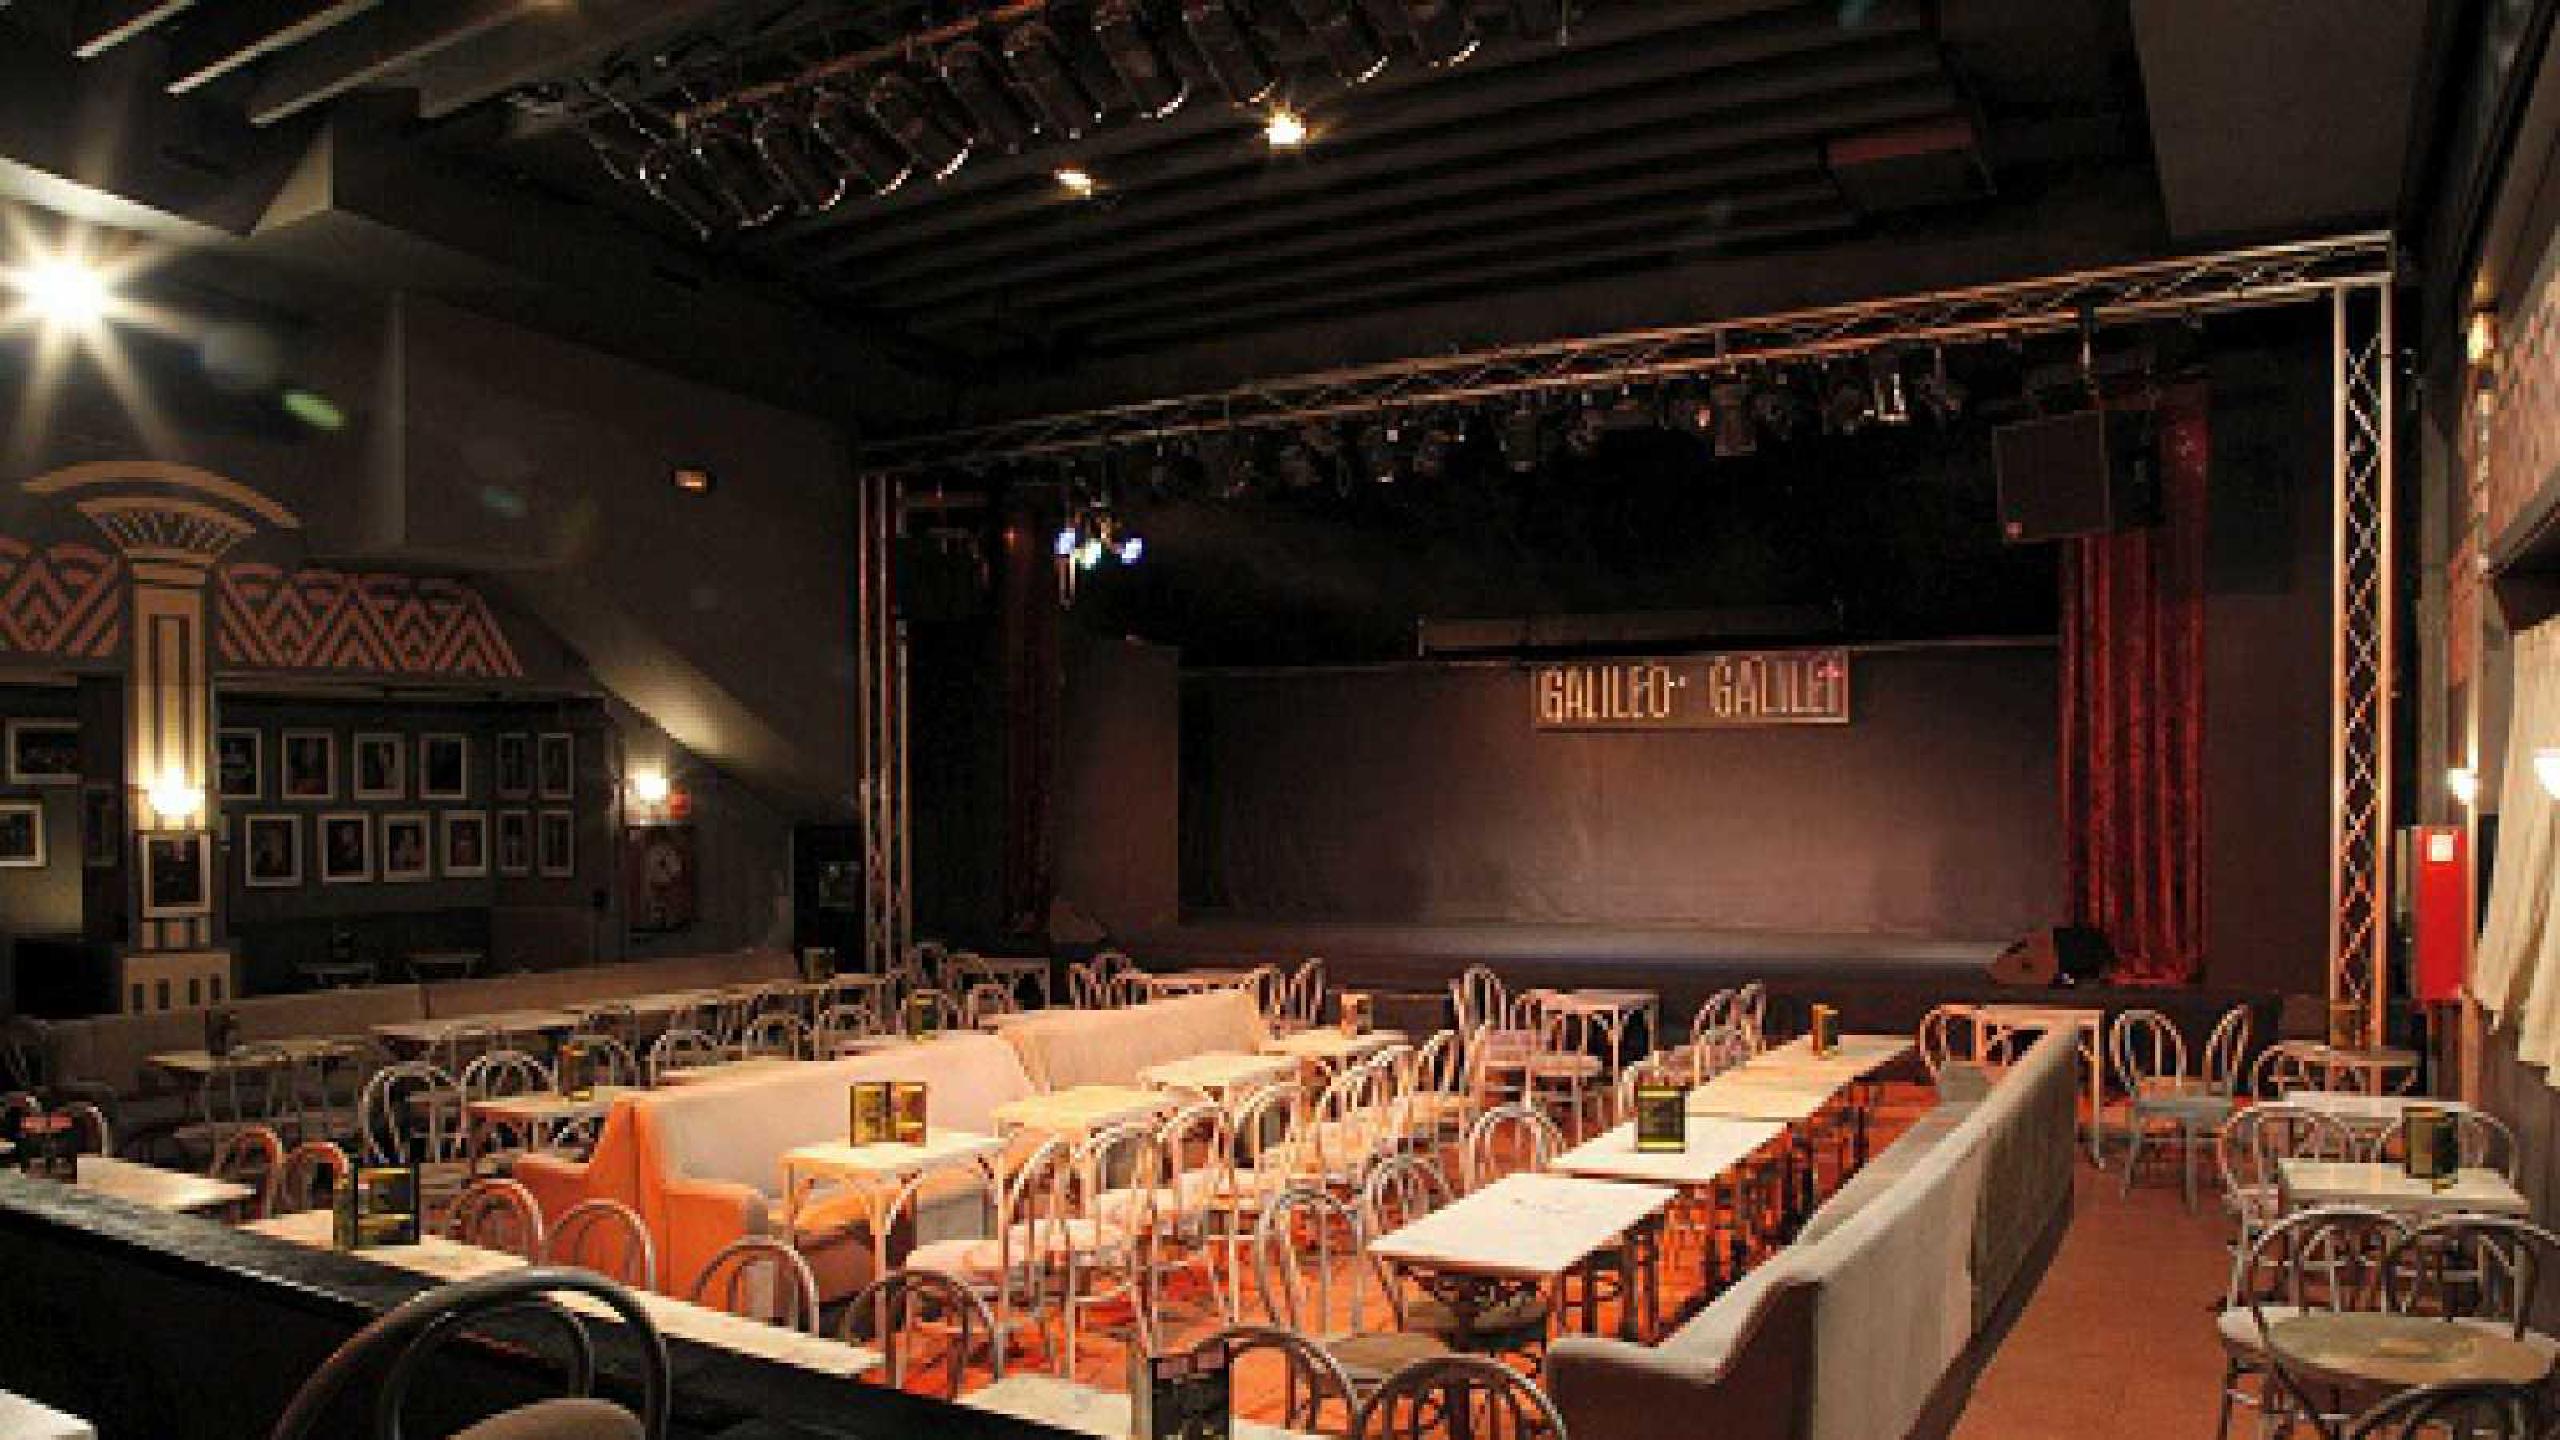 Galileo Galilei in Spain, Europe | Live Music Venues - Rated 3.6